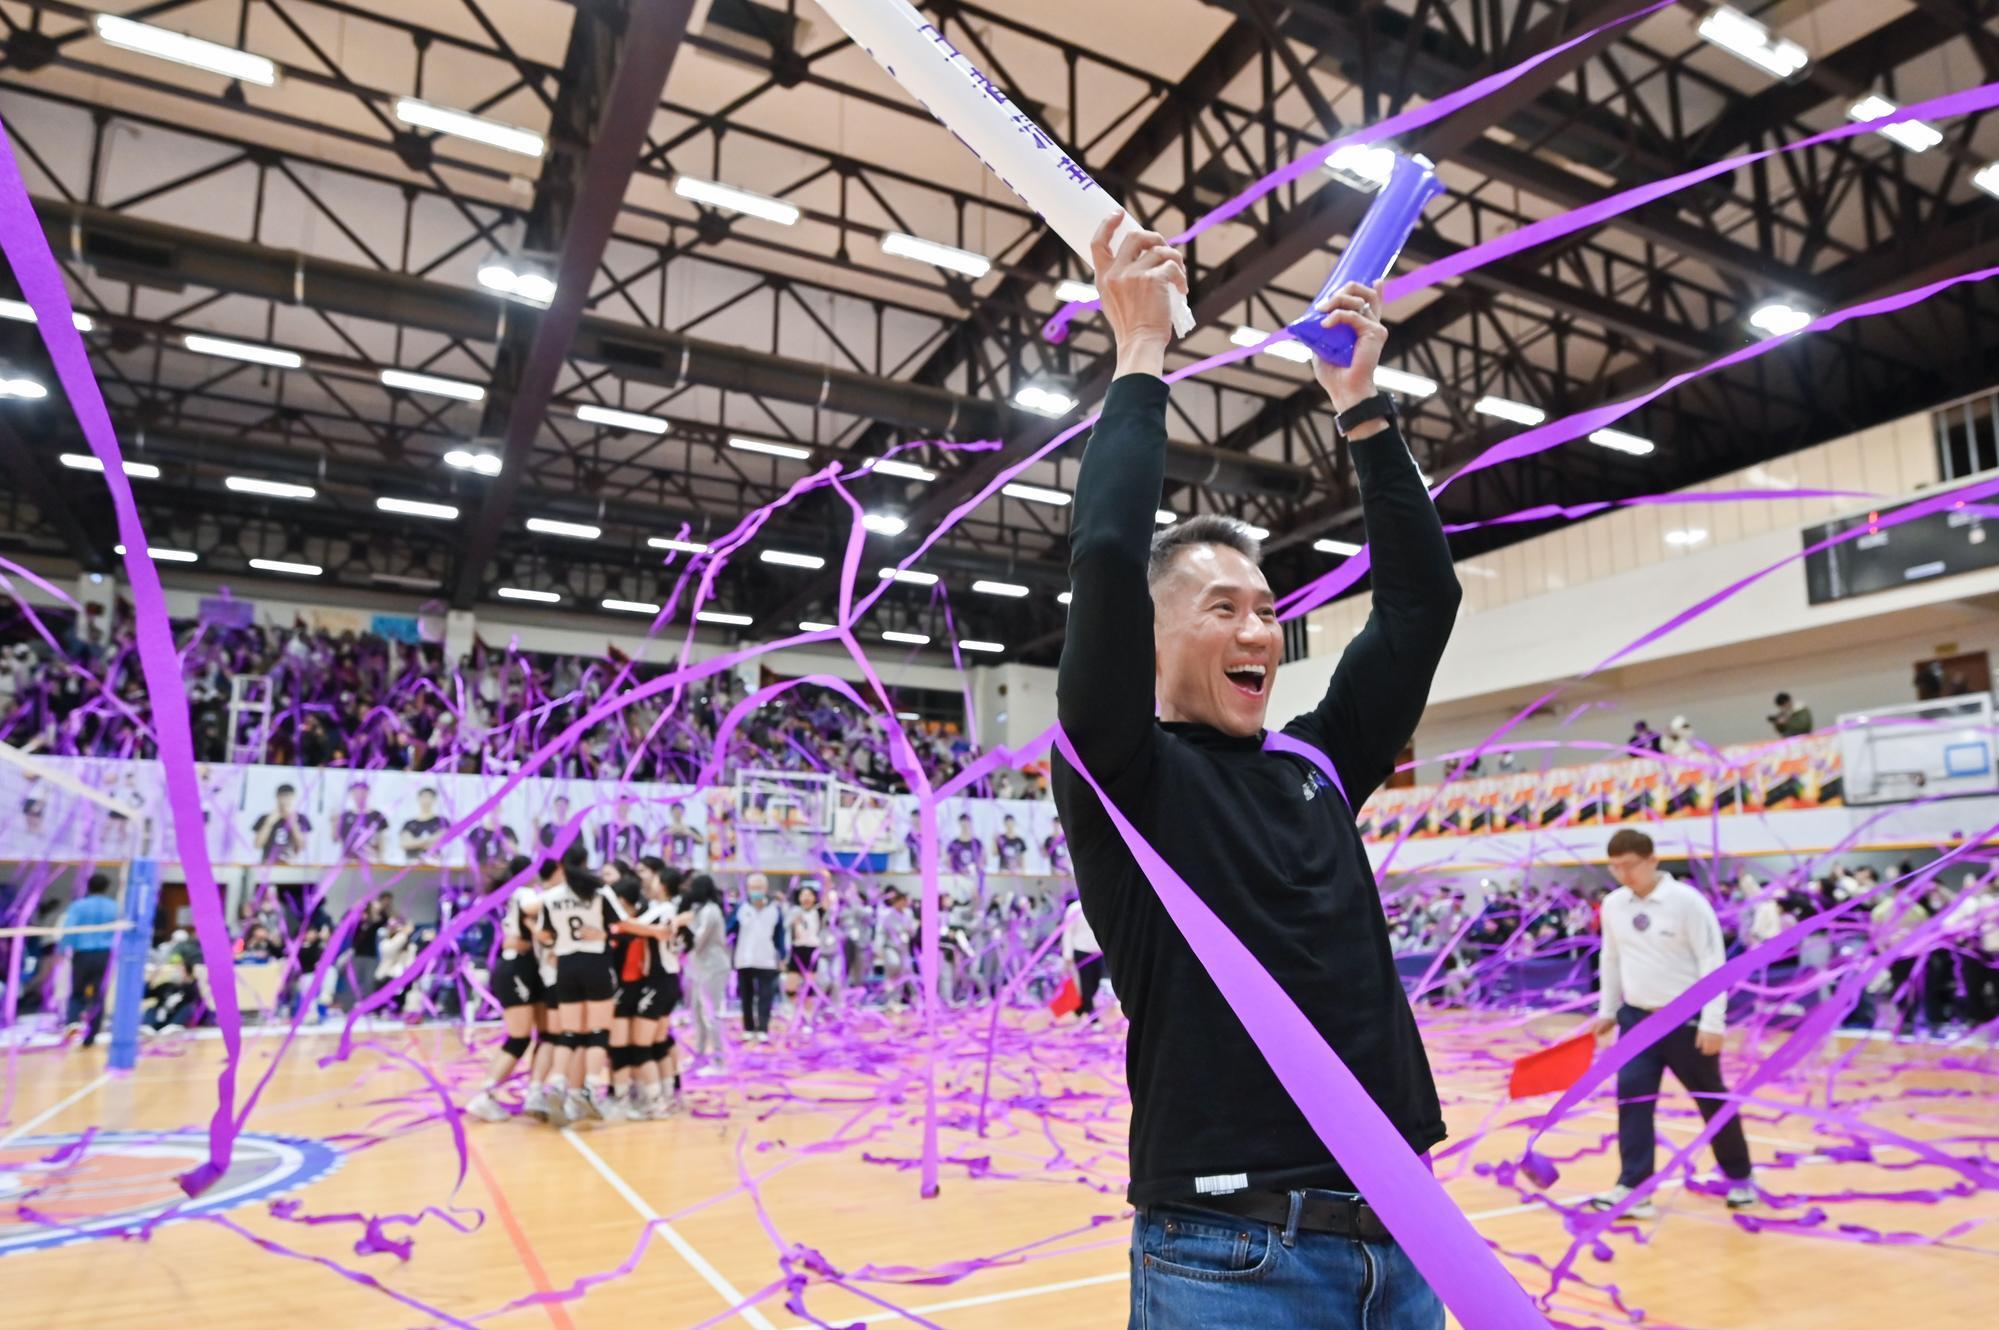 NTHU president W. John Kao (高為元) celebrating the victory, with the women’s volleyball team in the background.